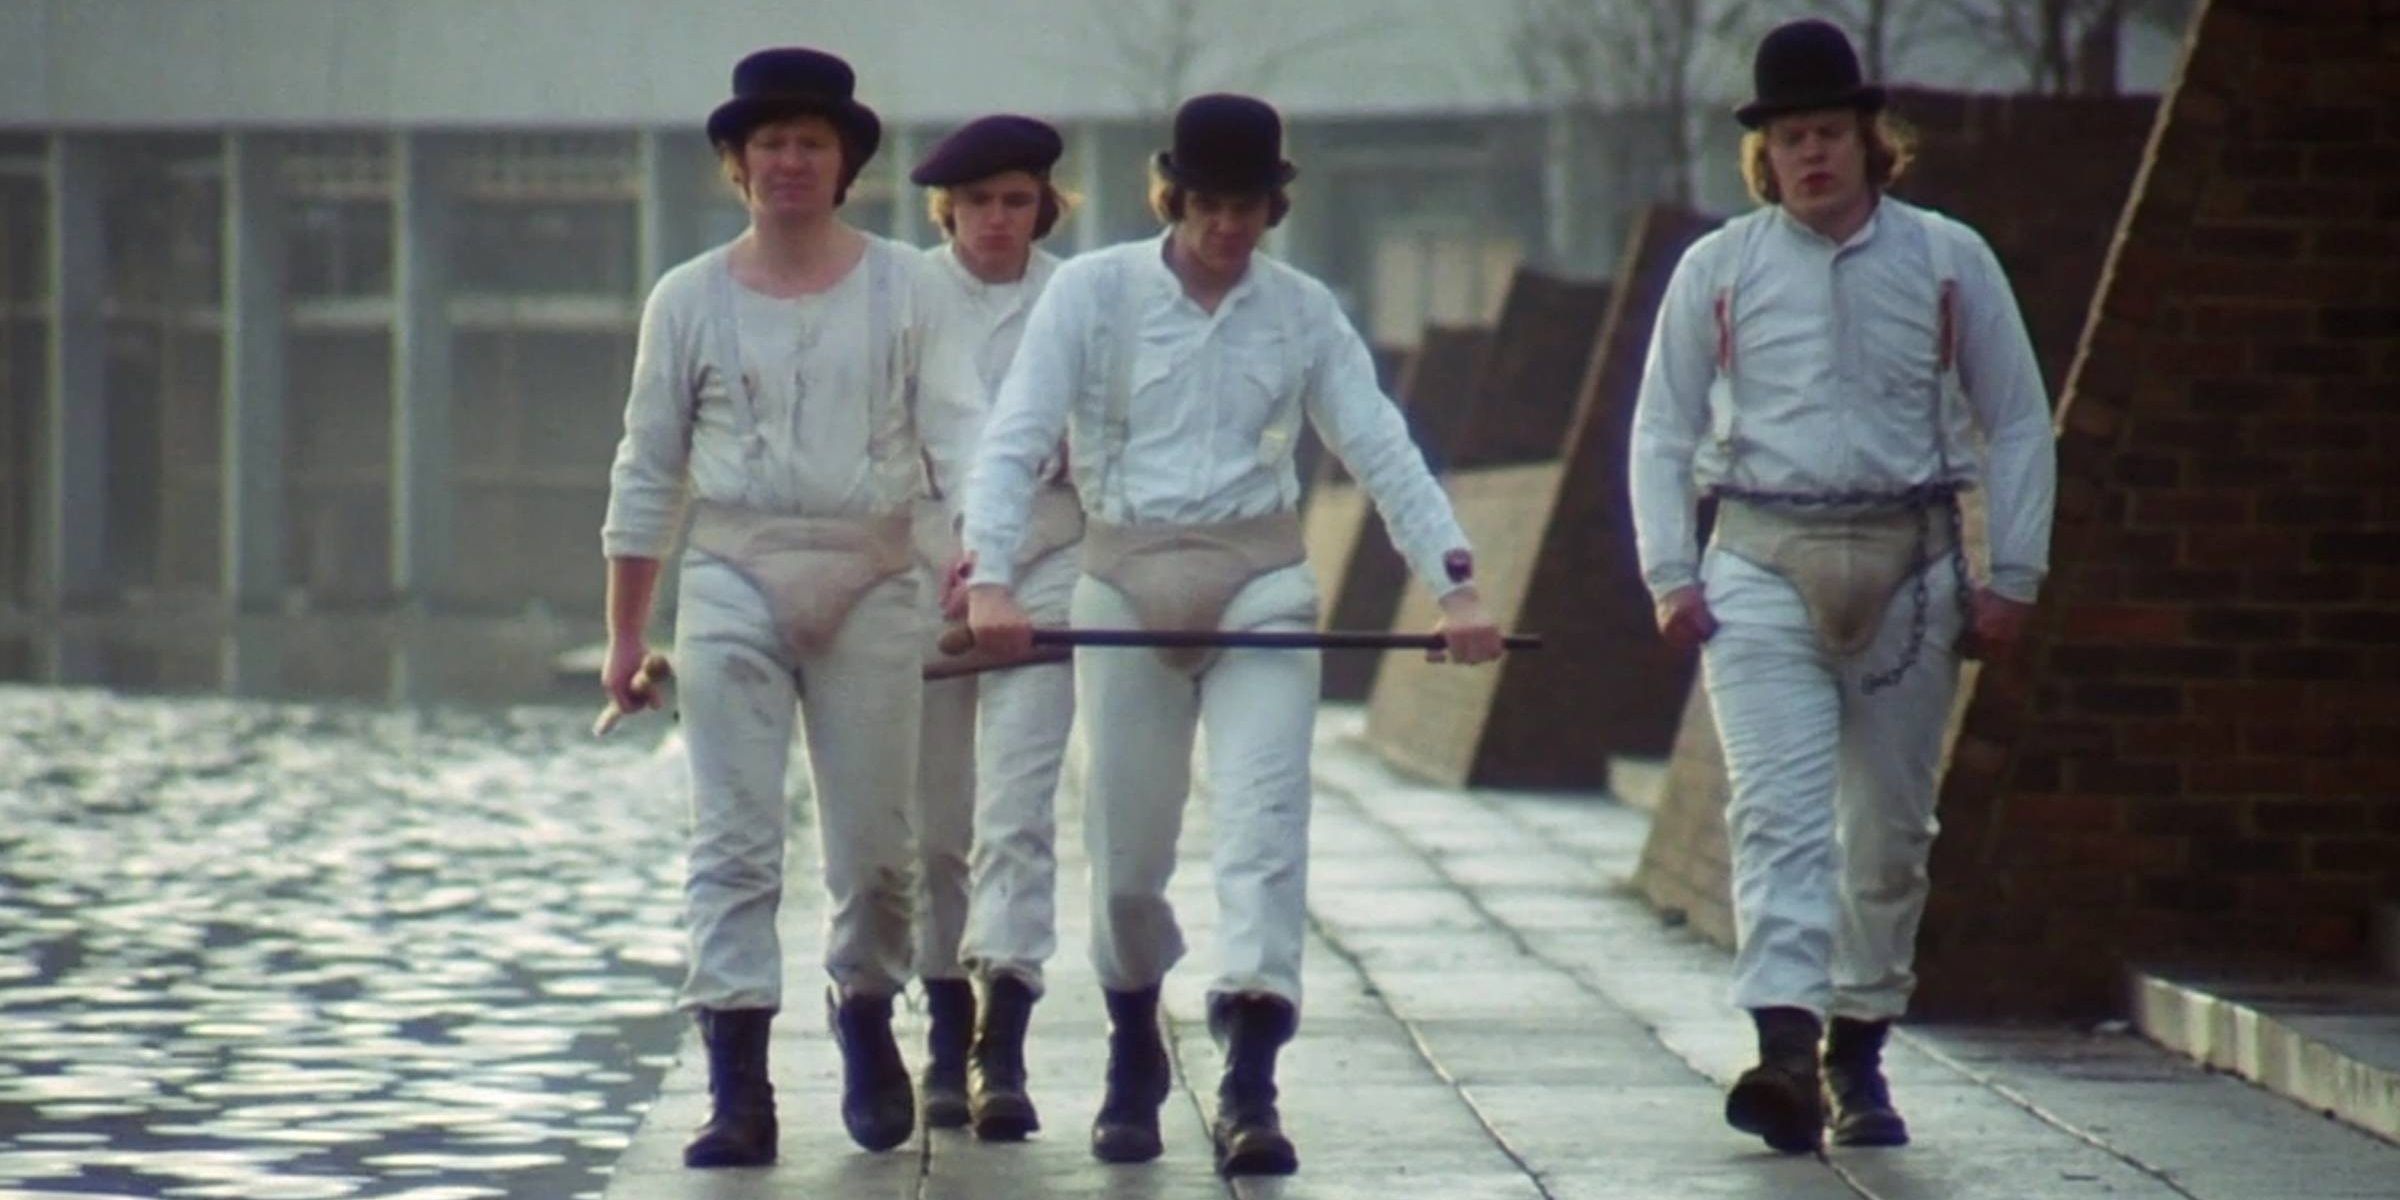 Alex and his droogs next to the marina in A Clockwork Orange